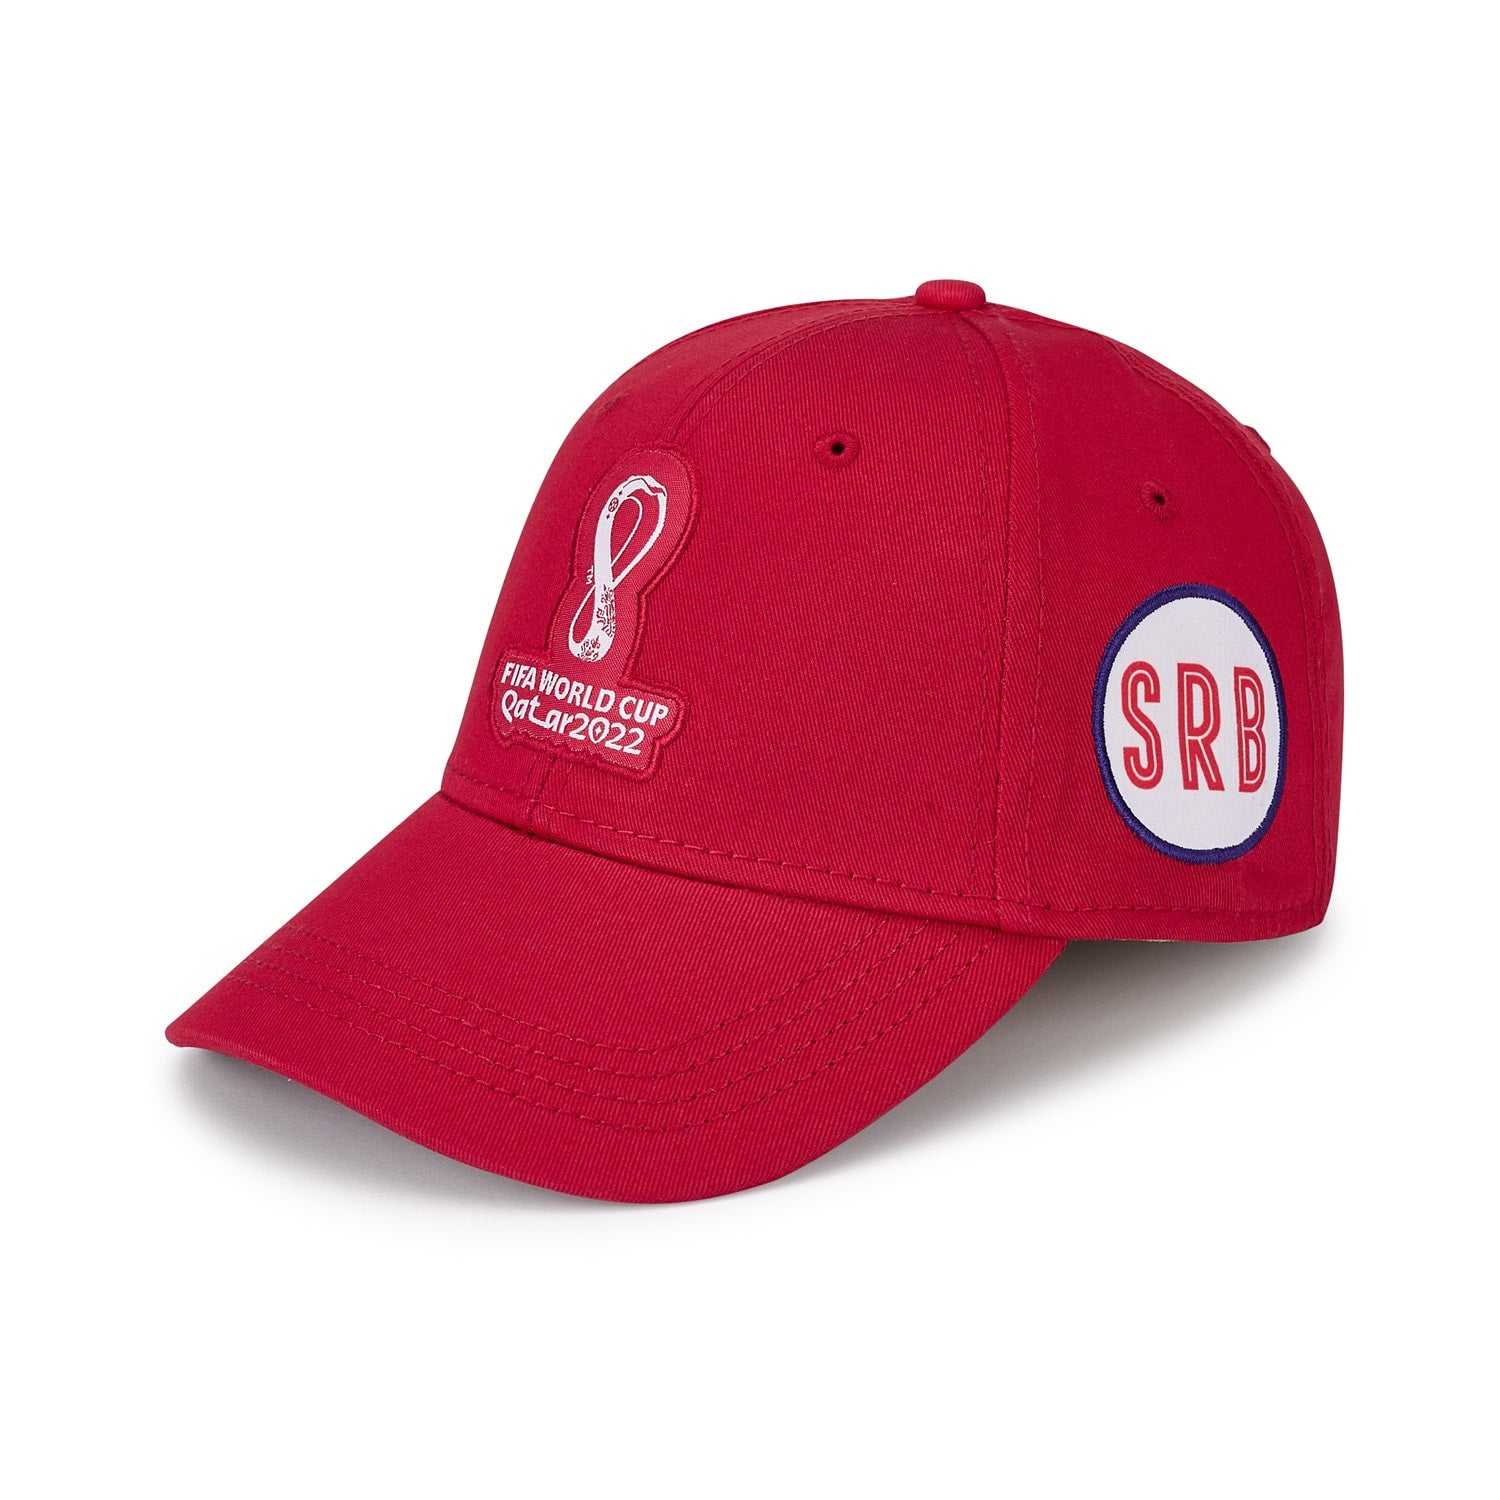 2022 World Cup Serbia Red Cap - Mens